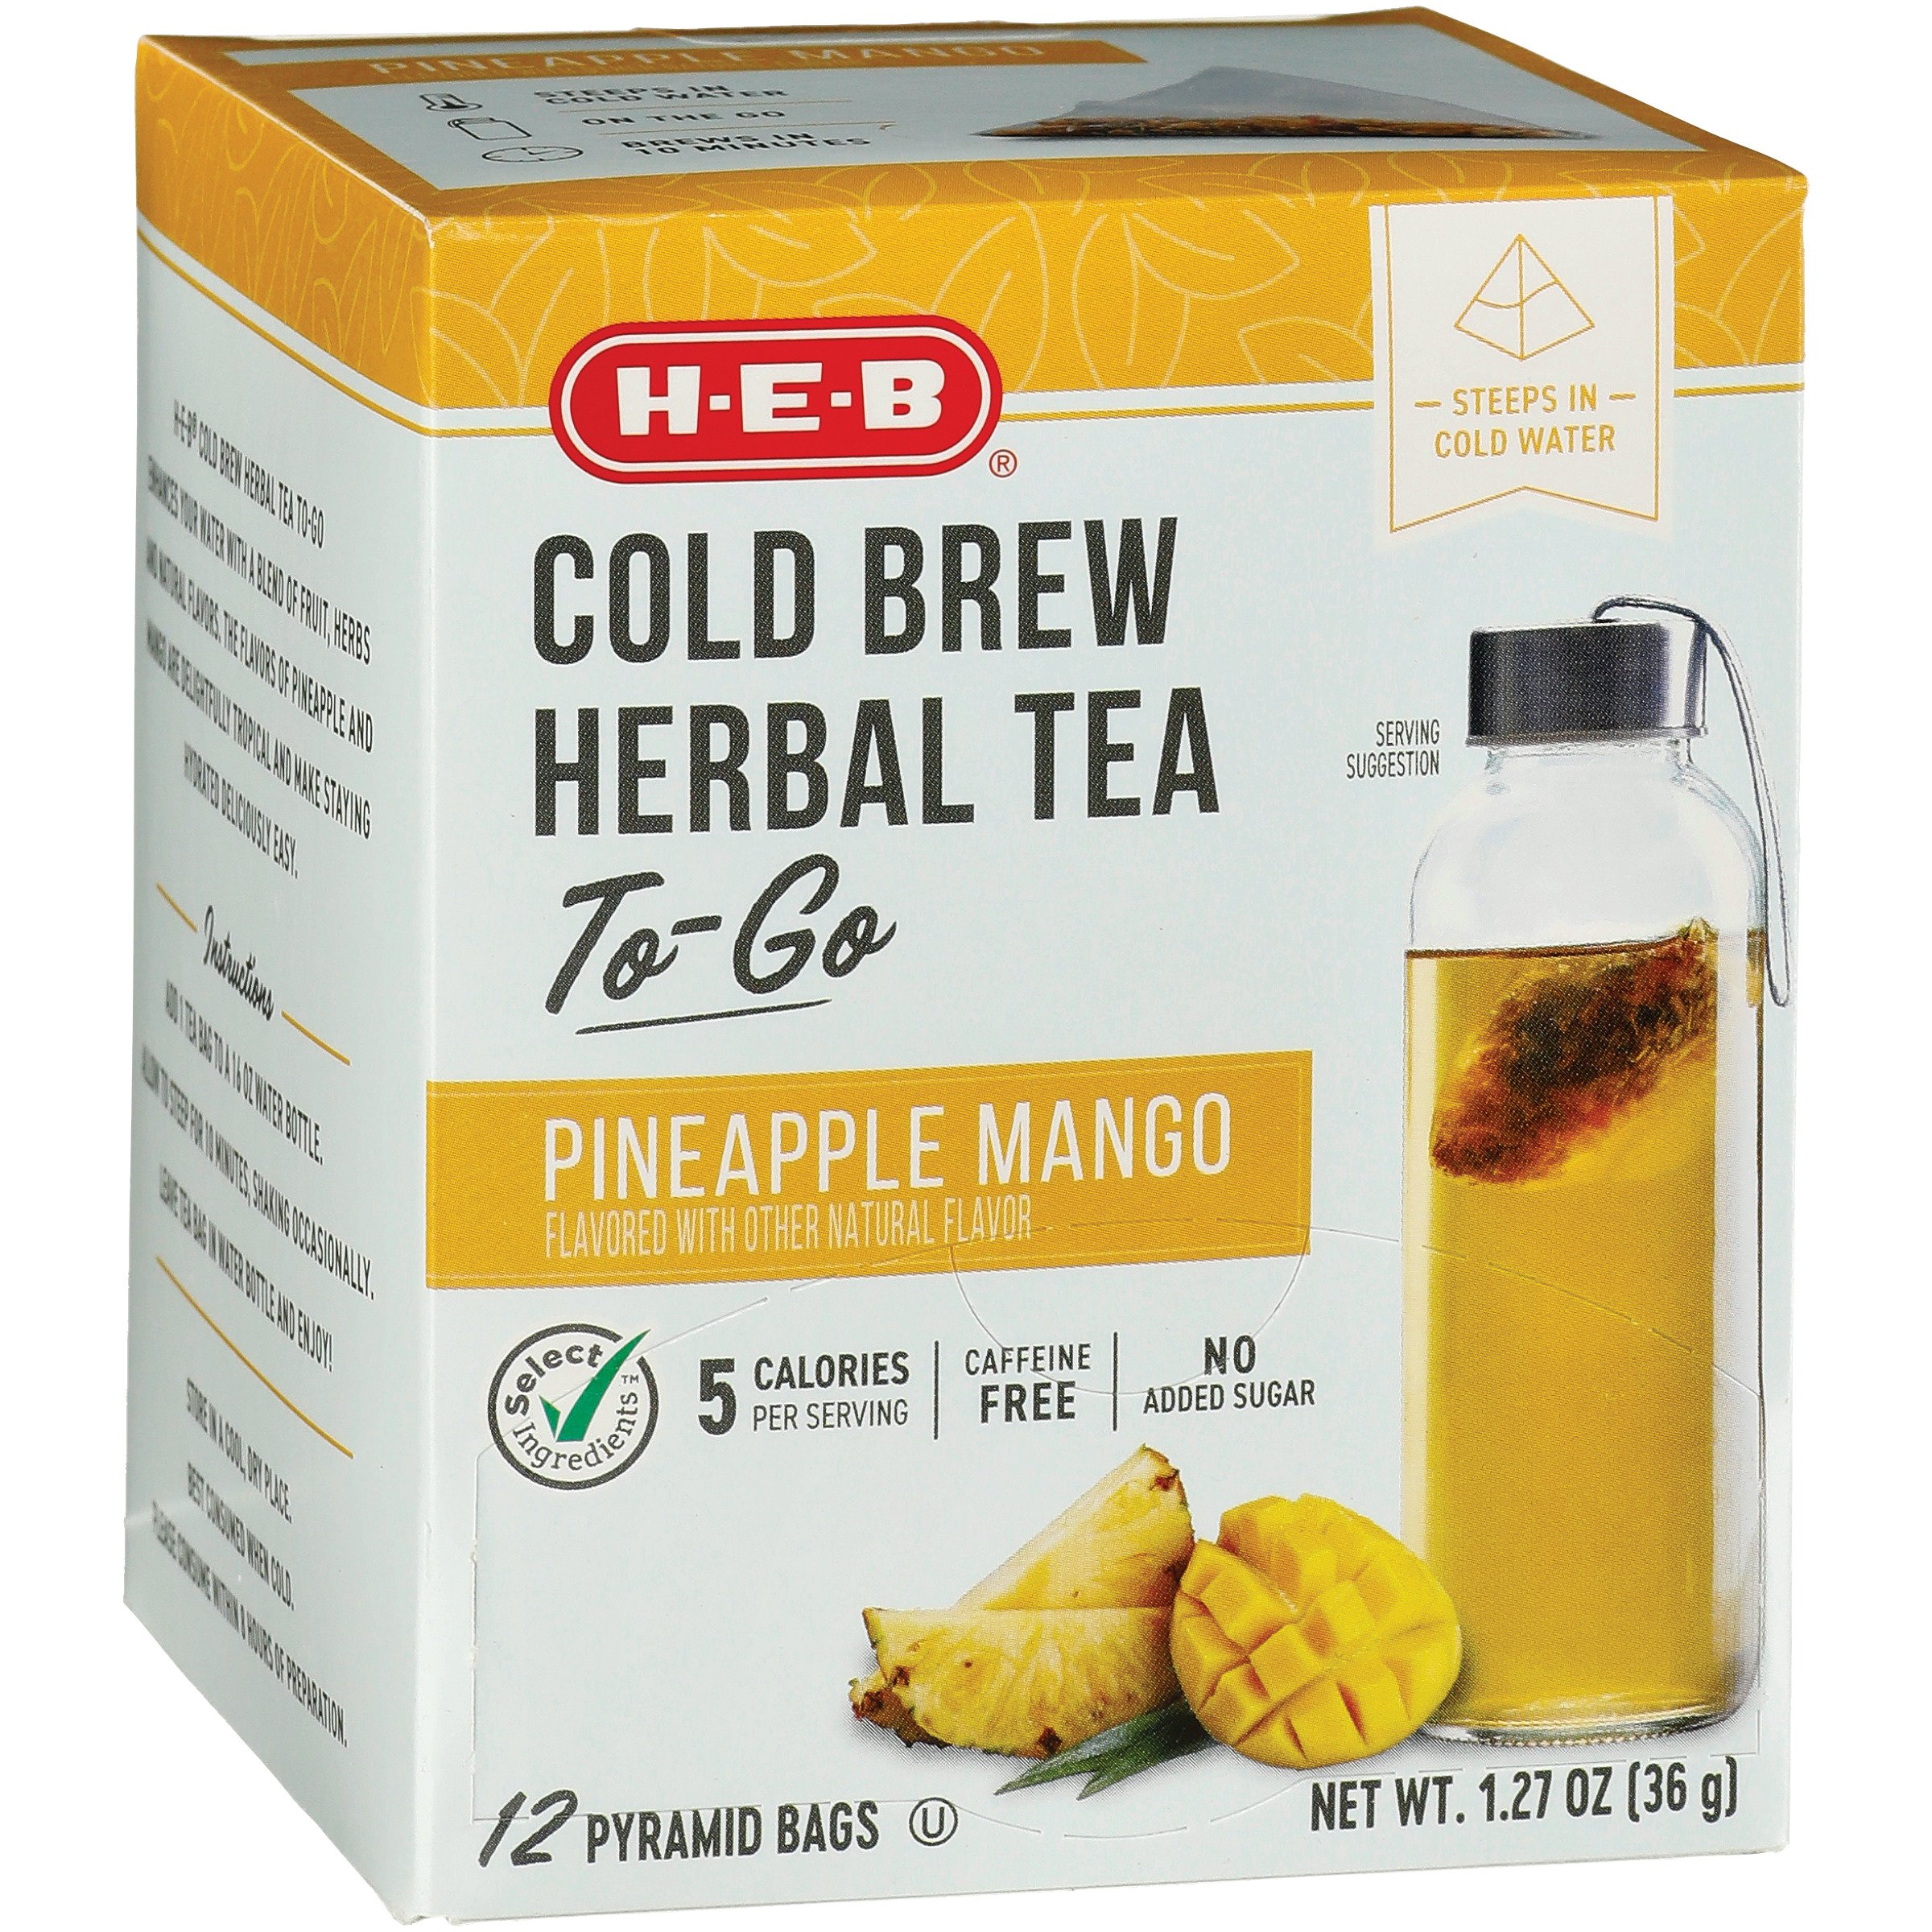 Can you cold brew with tea bags?